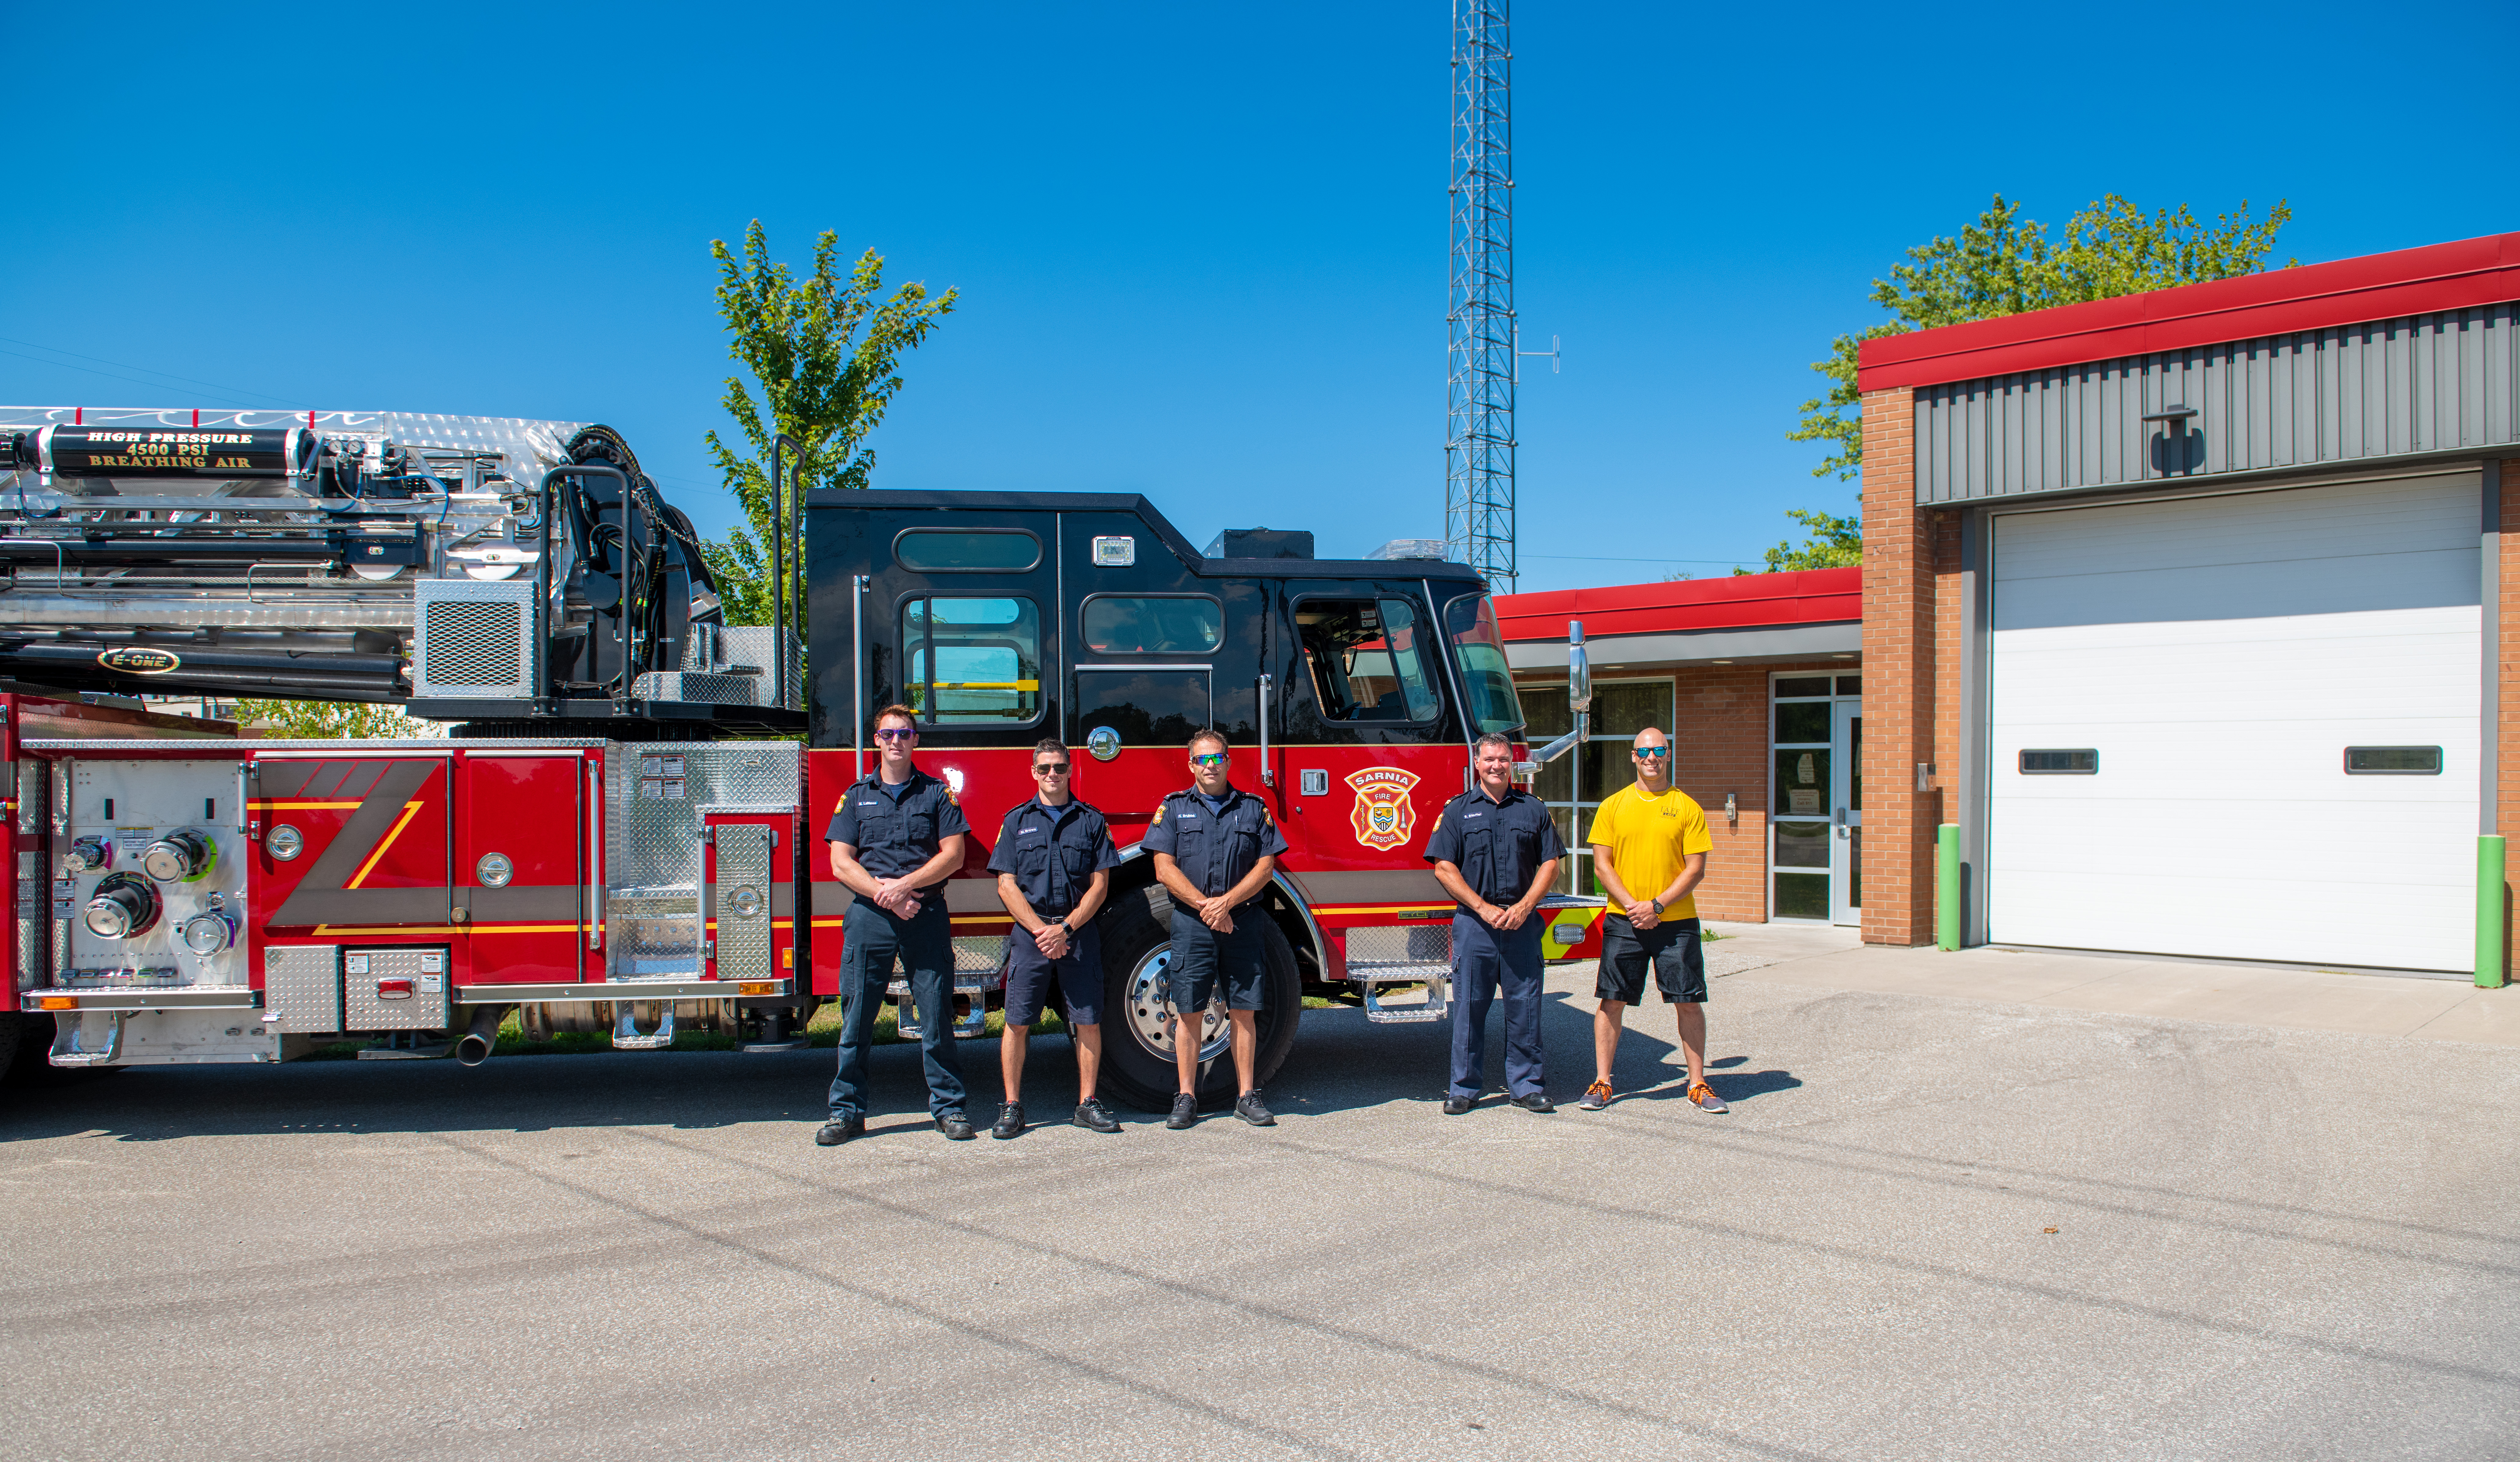 The firefighters at Sarnia's Churchill Road Firehall “Station 2”